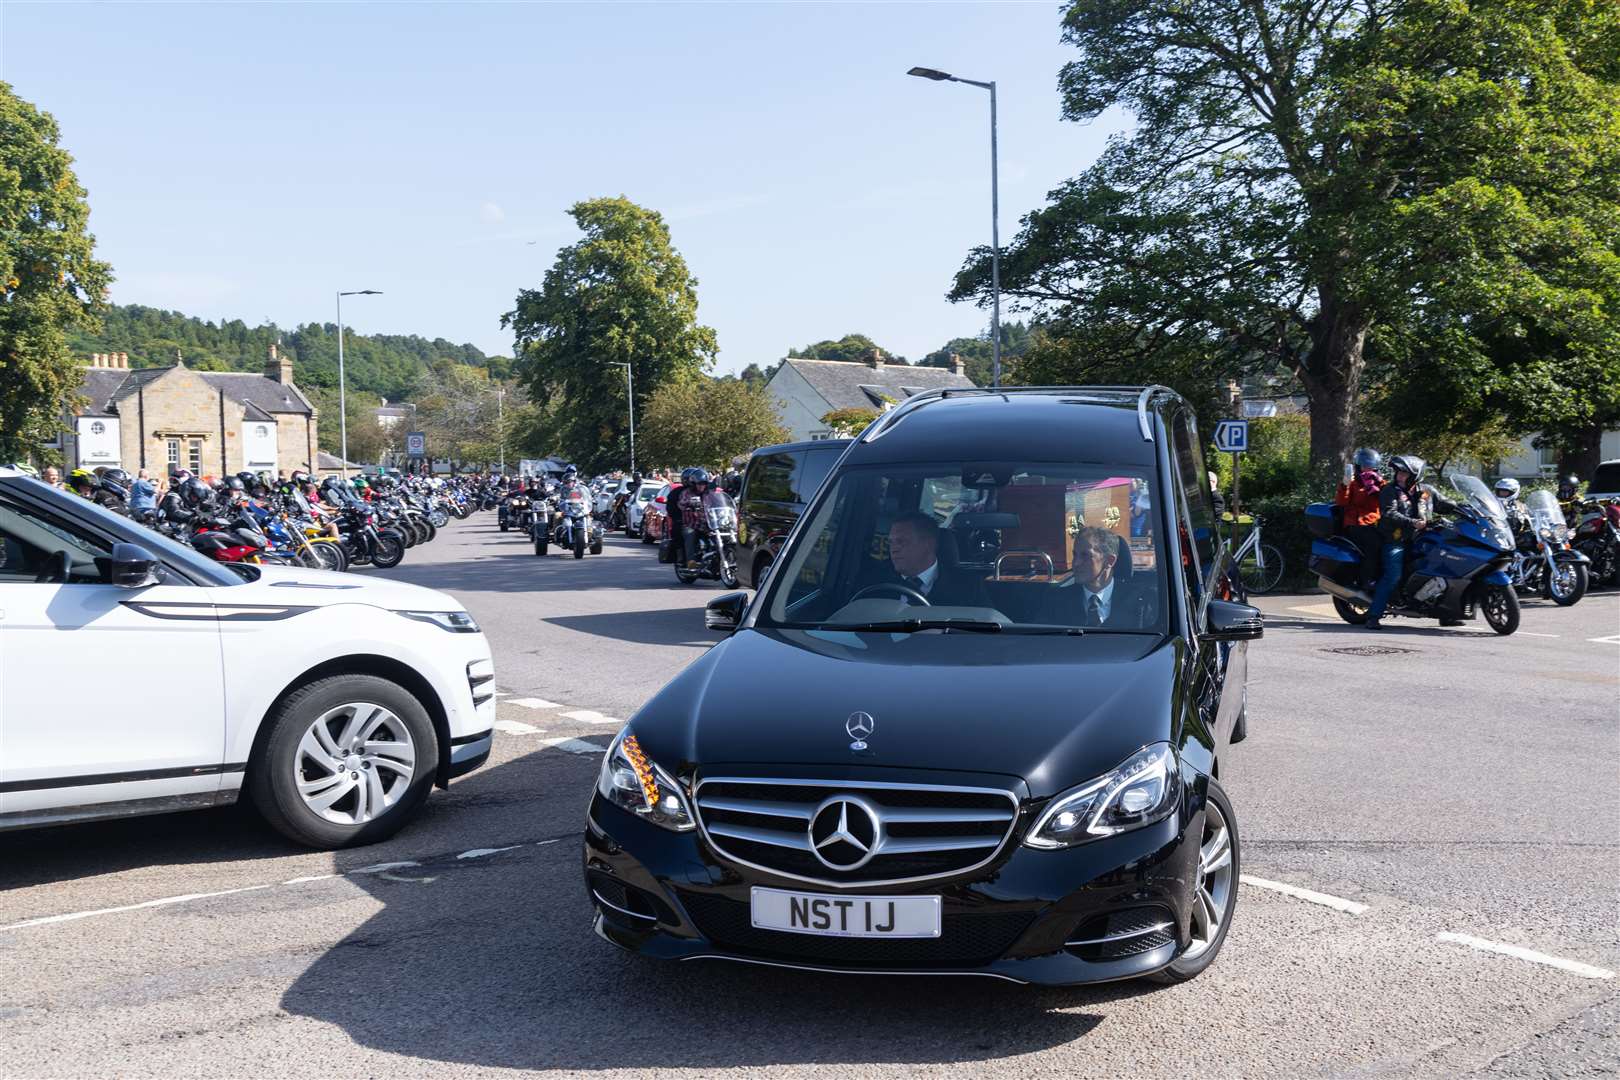 The funeral procession makes its way out of Forres. Picture: Beth Taylor